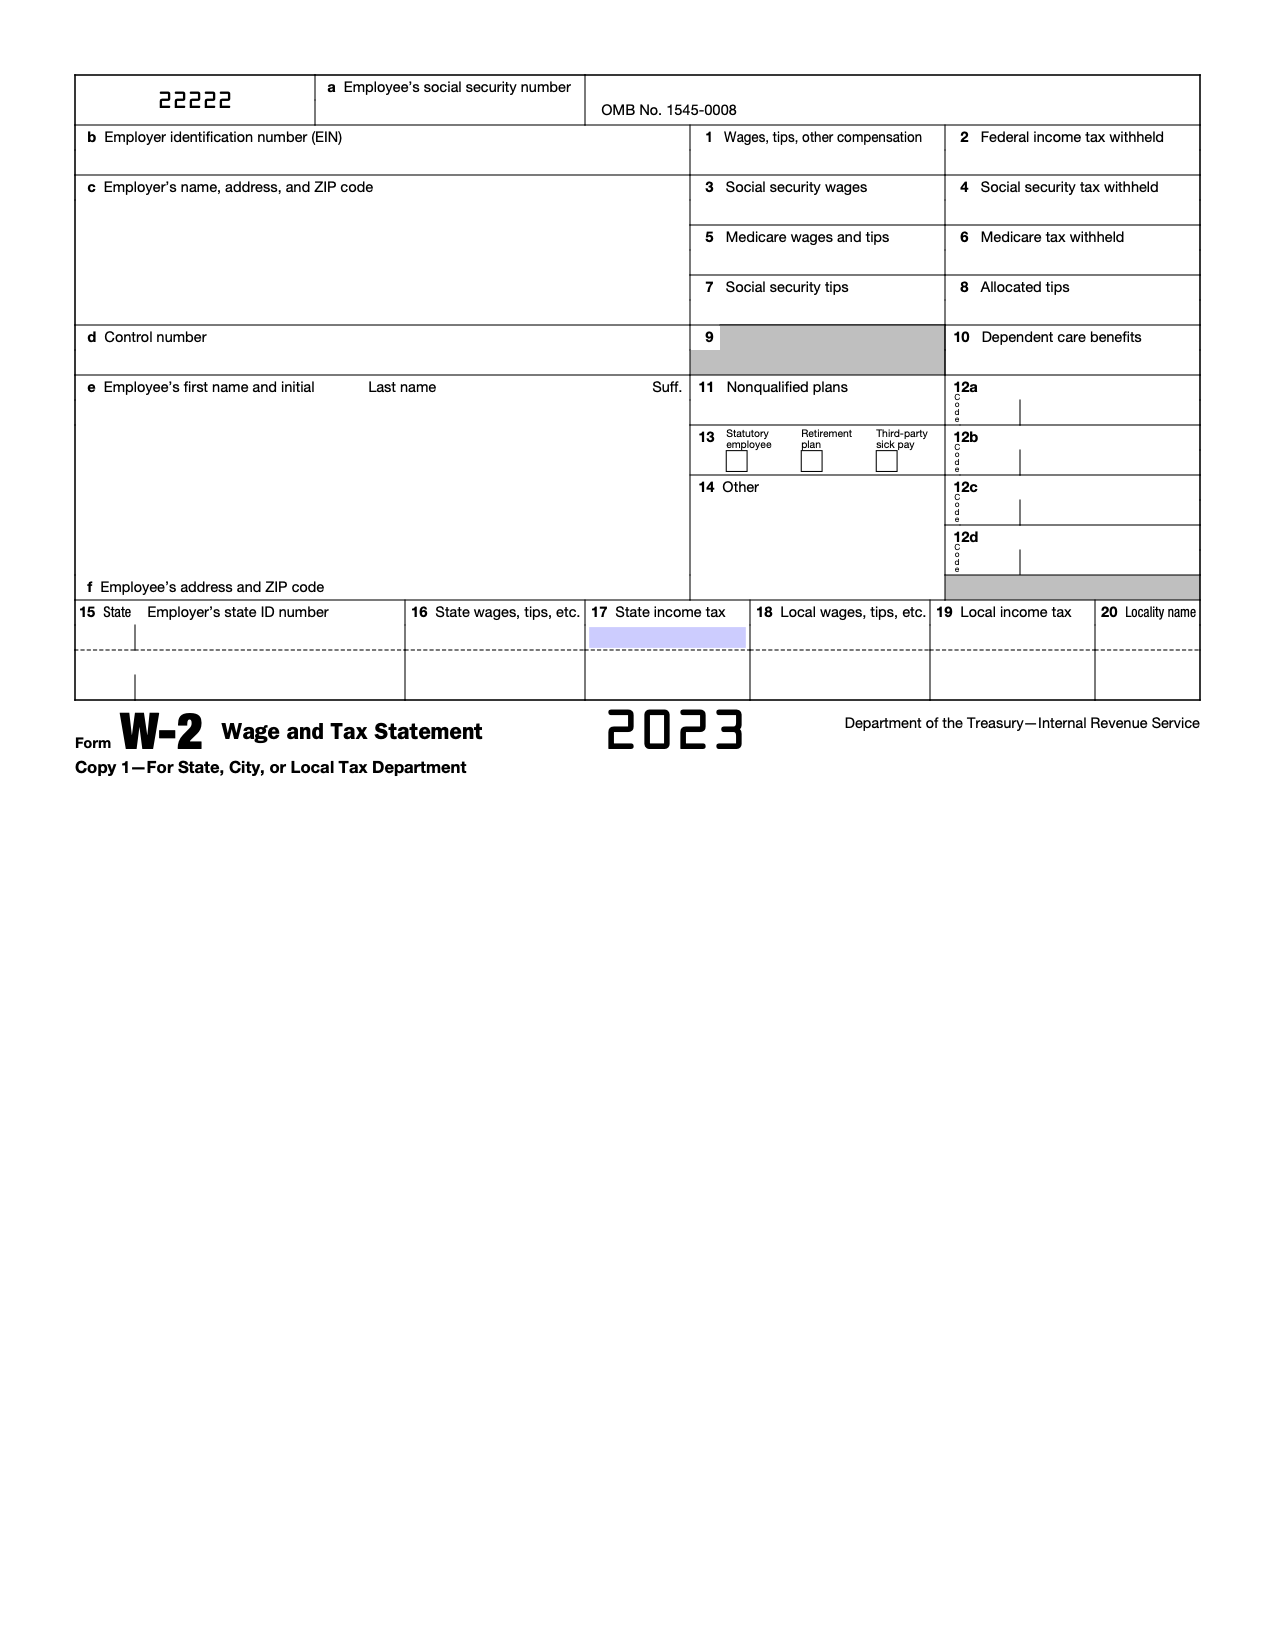 IRS Form W-2 | Wage and Tax Statement